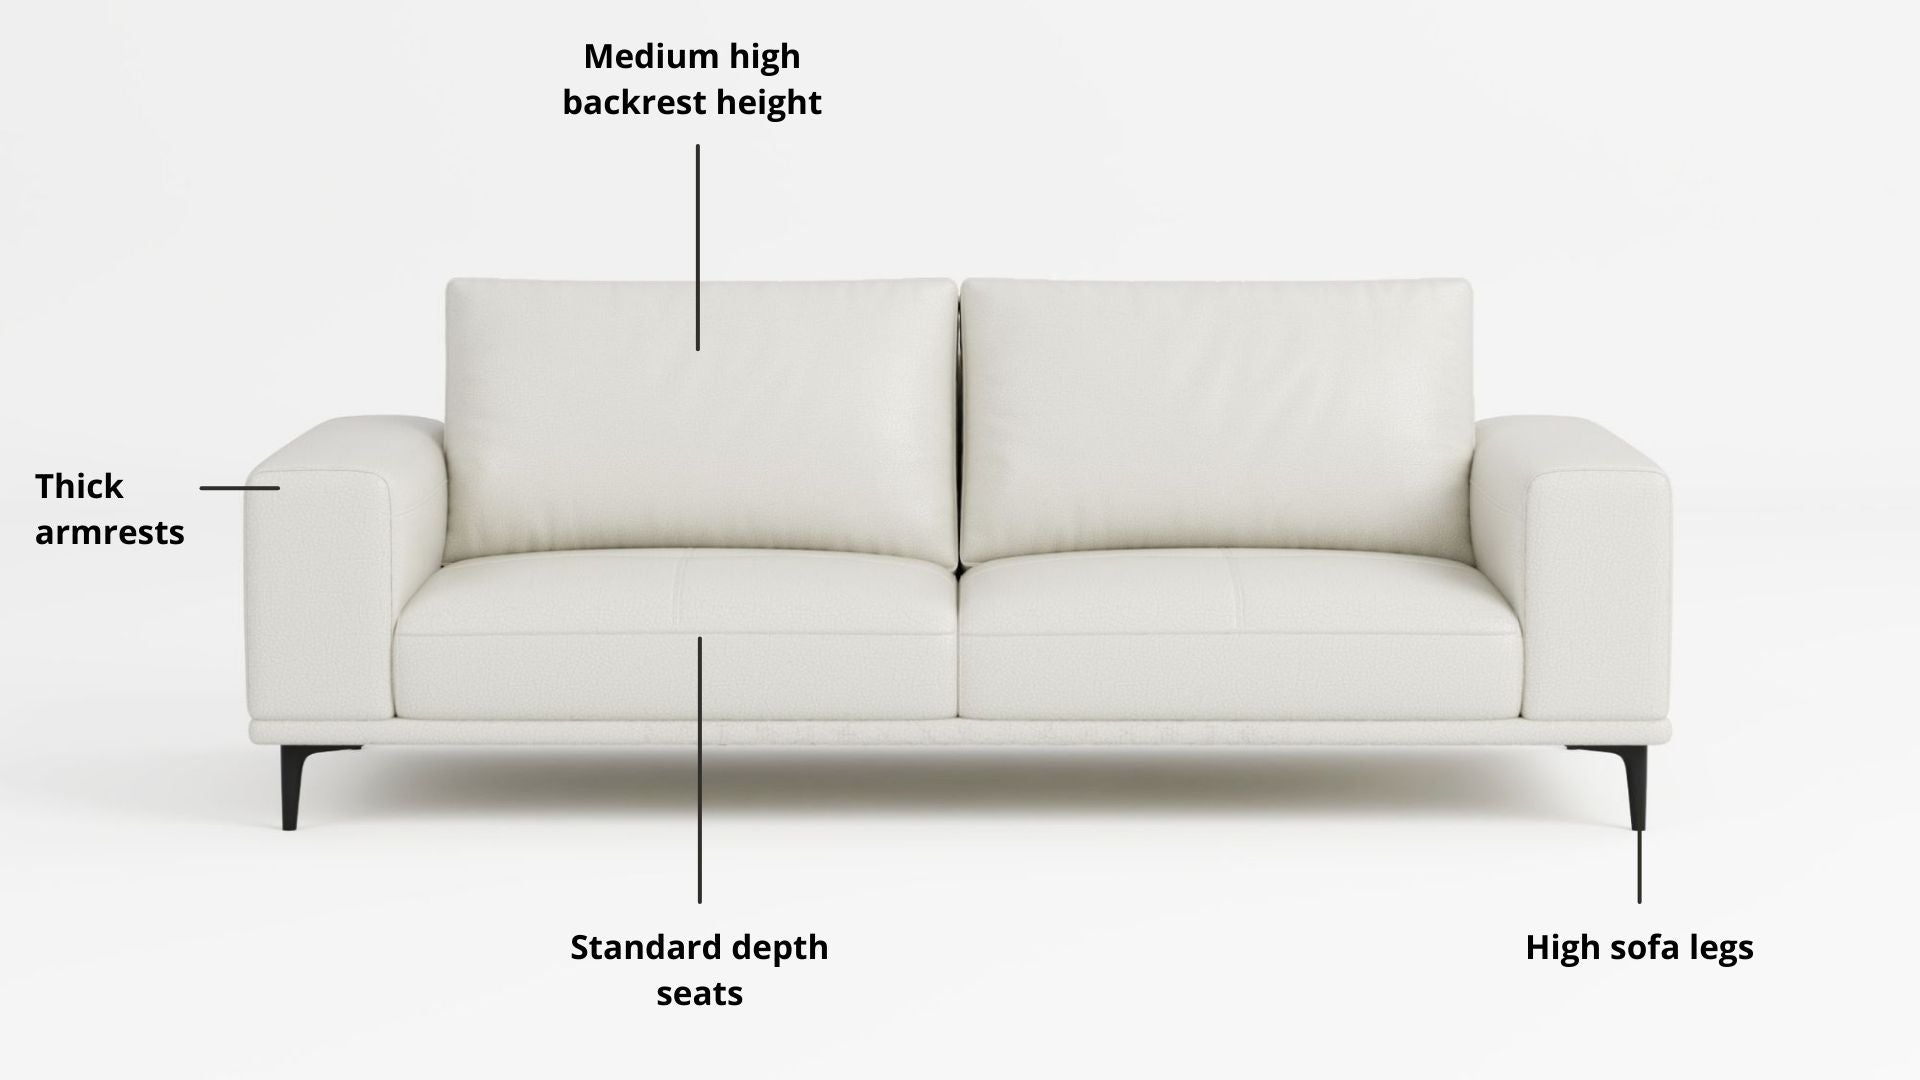 Key features such as armrest thickness, cushion height, seat depth and sofa leg height for Calm Full Leather Sofa